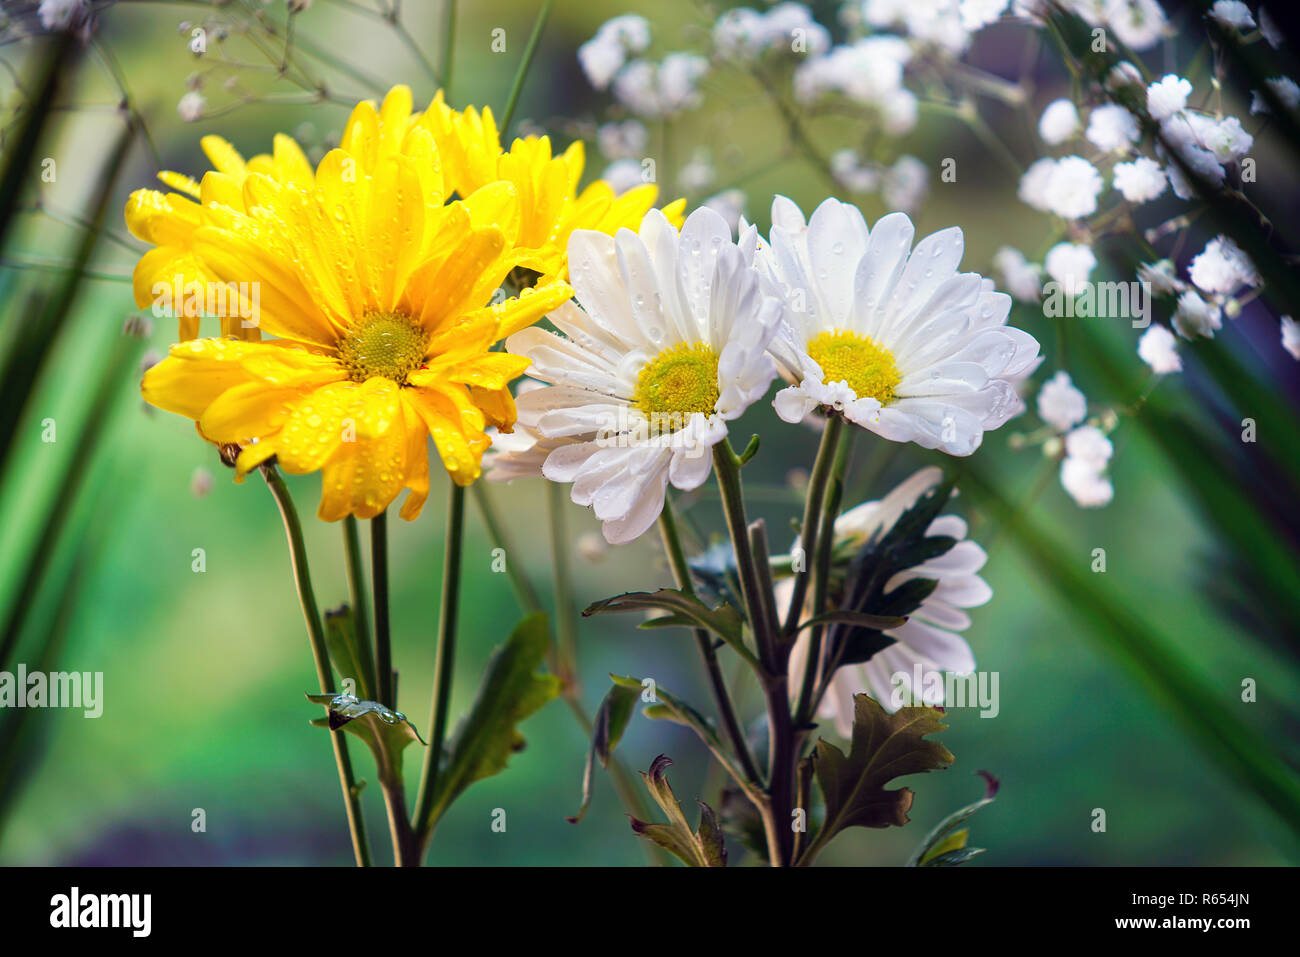 Montreal,Canada,3 December, 2018. Daisy flowers on a spring day. Credit:Mario Beauregard/Alamy Live News Stock Photo